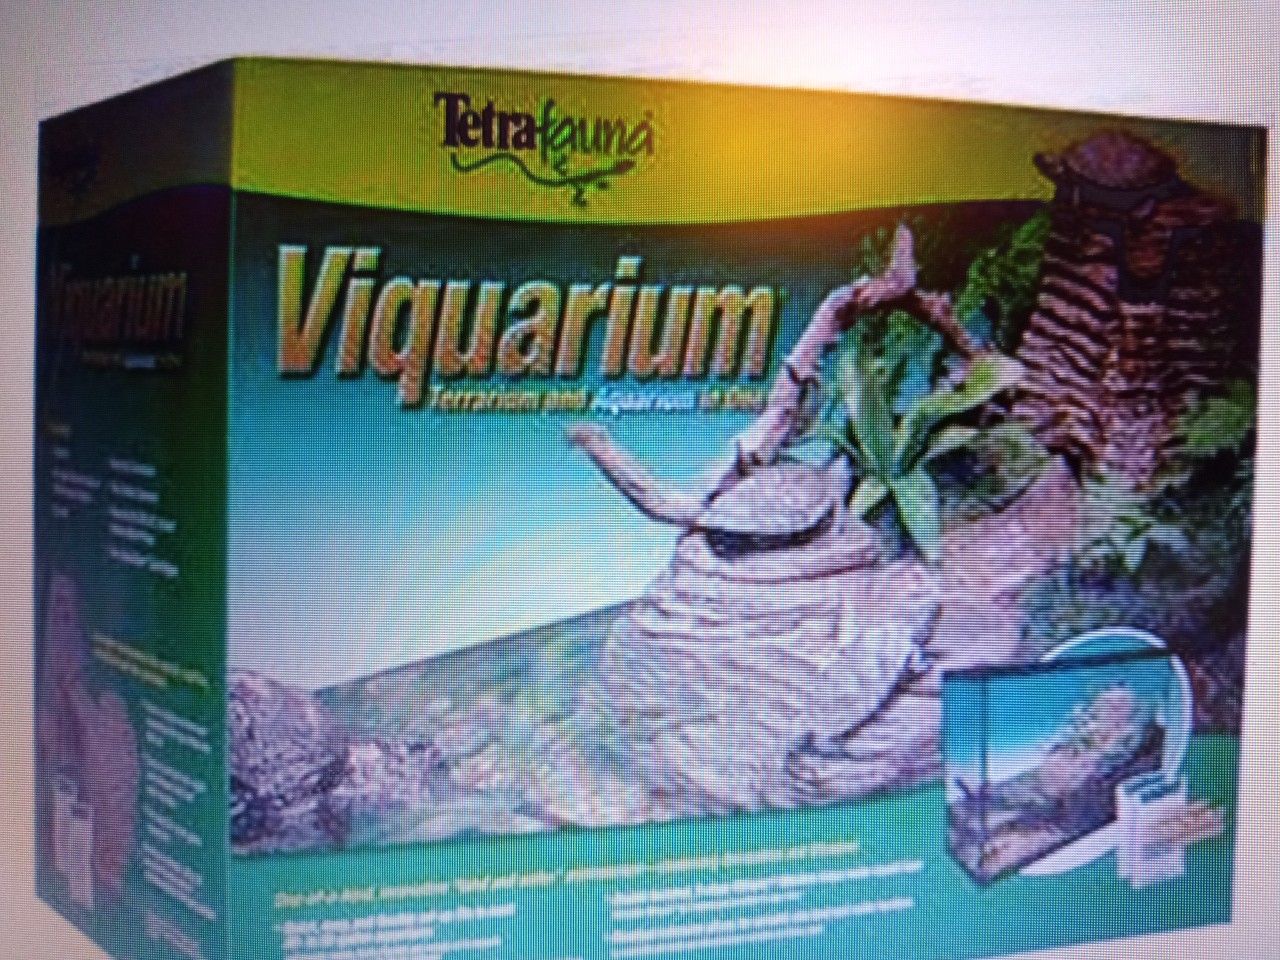 Viquarium by Tetra fauna, water fall and filter